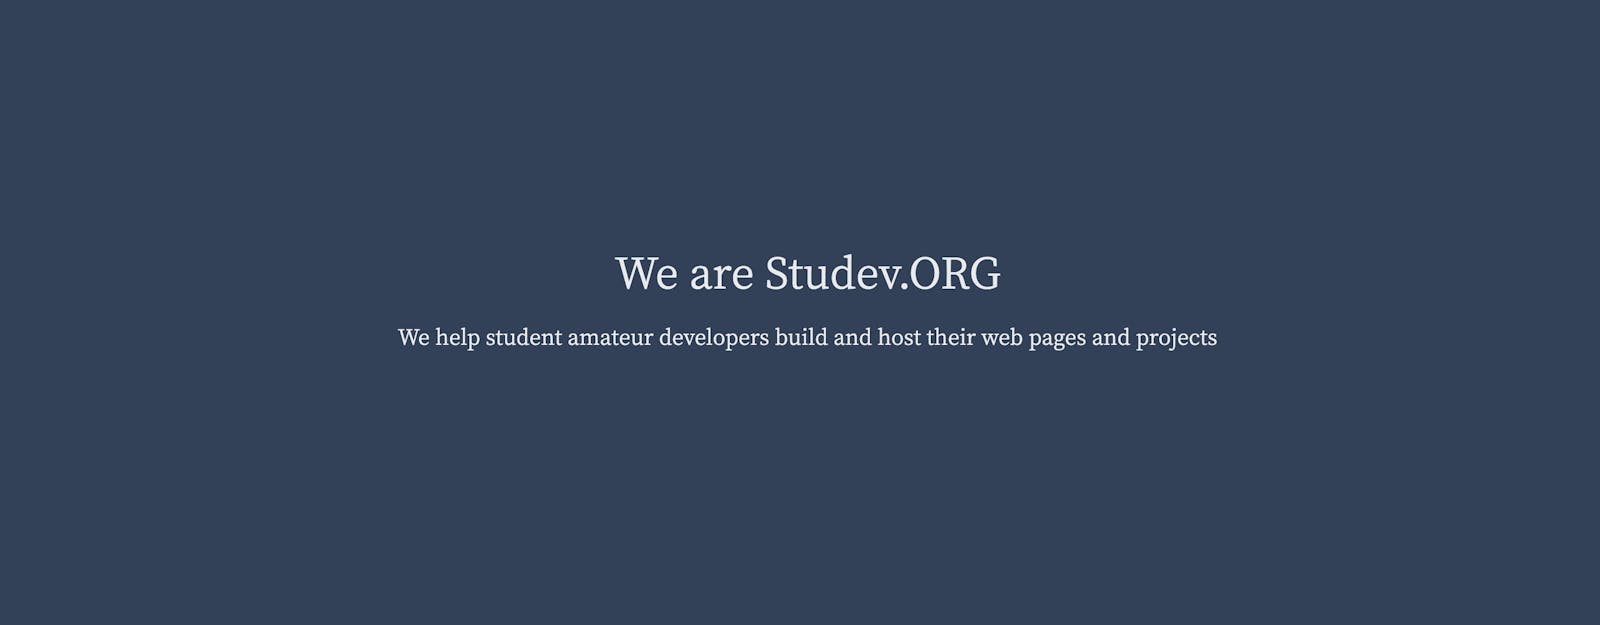 Studev.ORG: Help student amateur developers build and host their web pages and projects